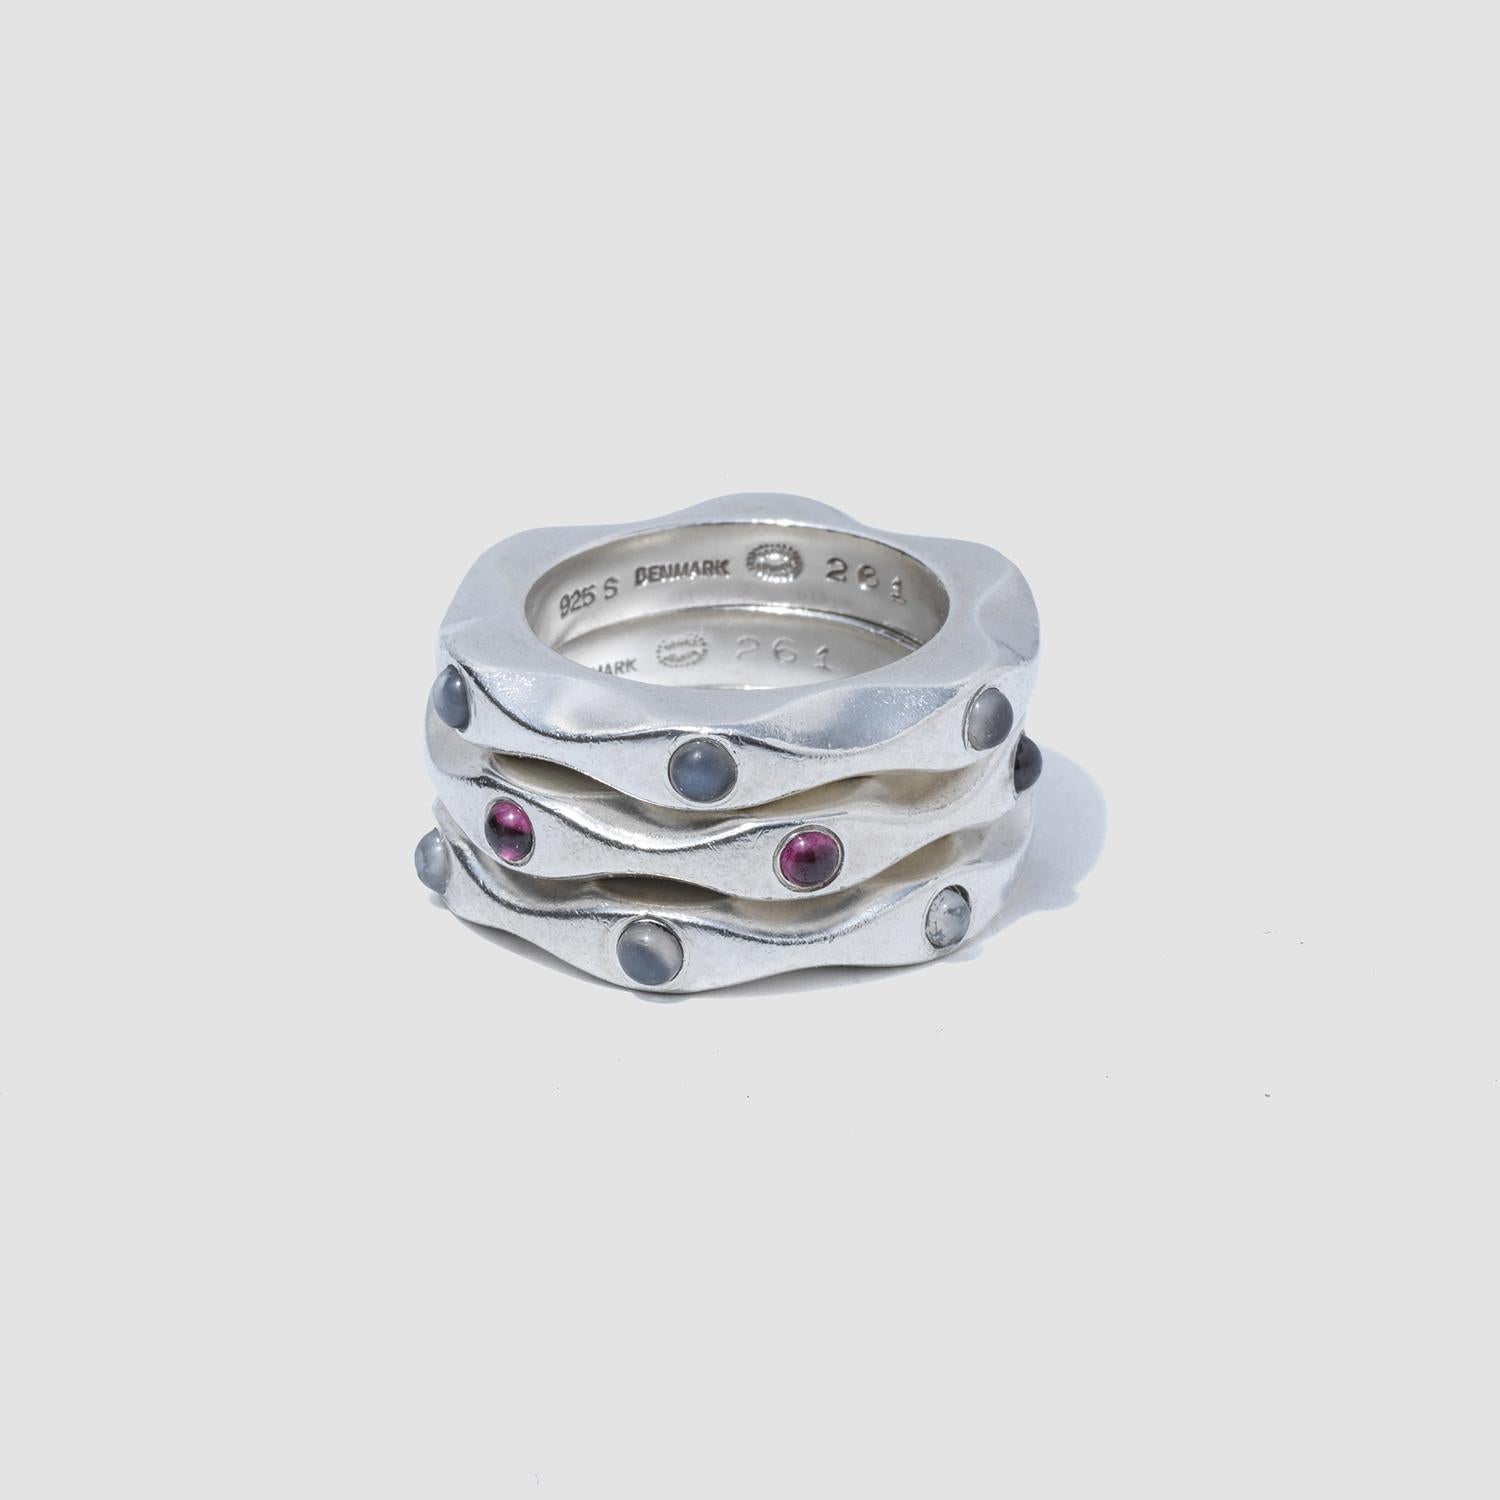 These sterling silver rings present a contemporary take on classic style, with one featuring three cabochon-cut garnets and the other two adorned with three moonstones, each gem set elegantly within the fluid design. Their wavy, contoured shape